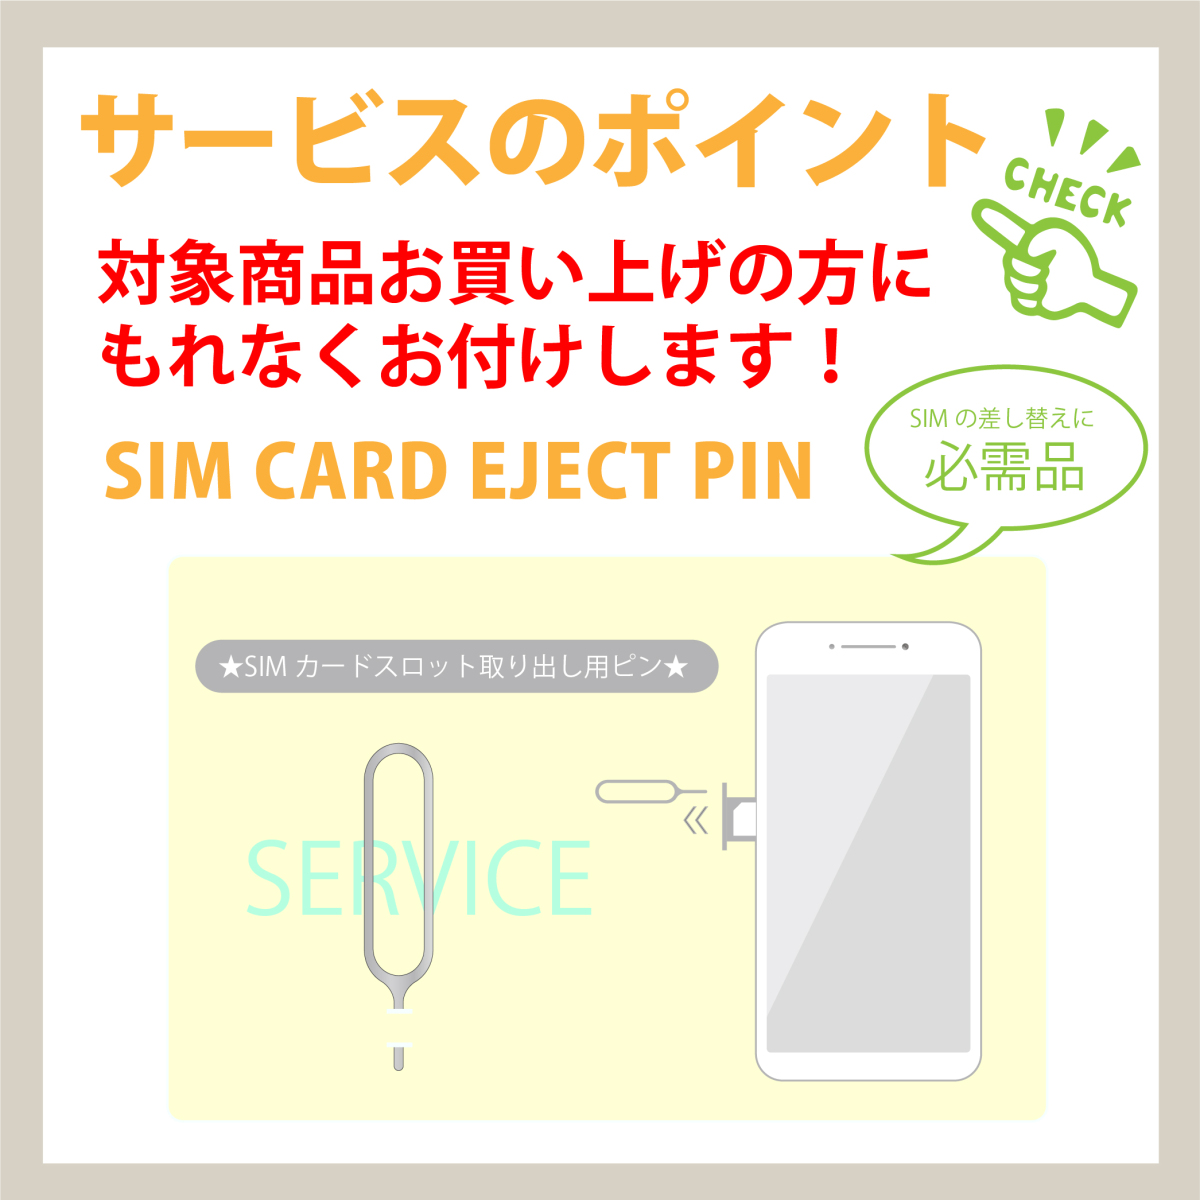 [ free shipping ] new product! 30GB/180 day plipeidoSIM card disposable SIM data communication exclusive use 4G/LTE correspondence short period use high capacity Japan domestic for docomo MVNO